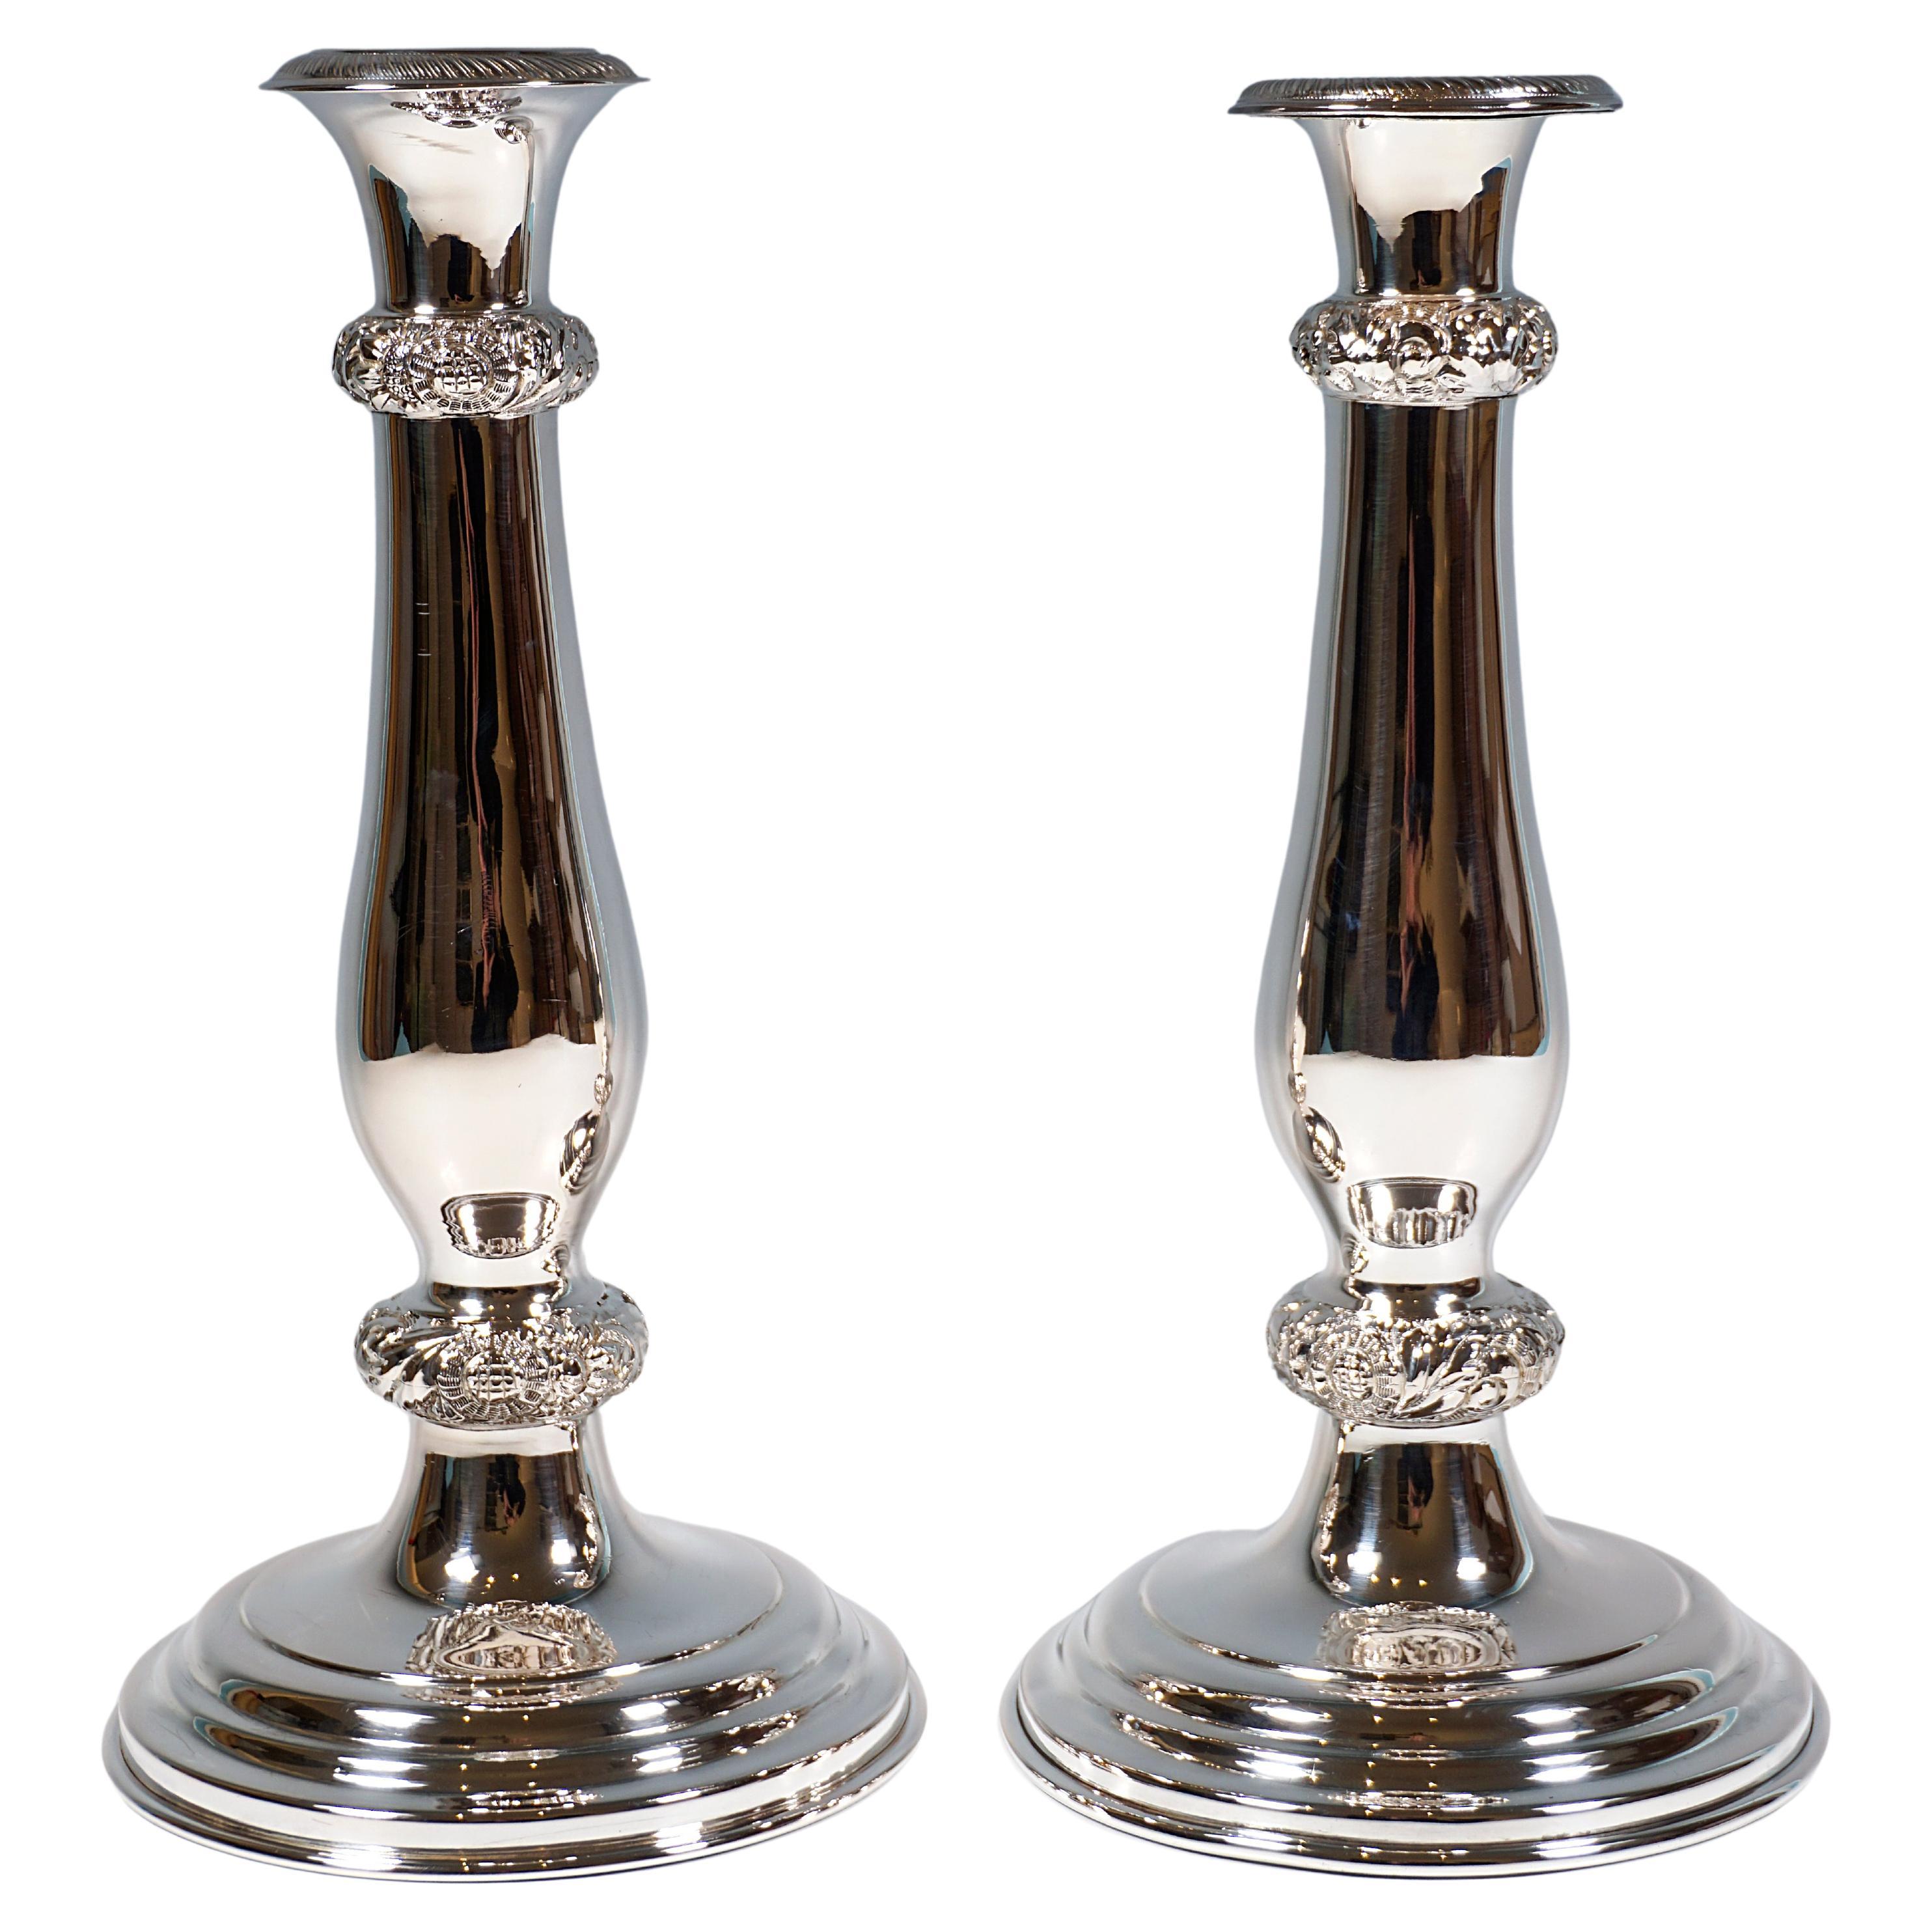 Pair Of Antique Vienna Biedermeier Silver Candle Holders, Dated 1844 For Sale